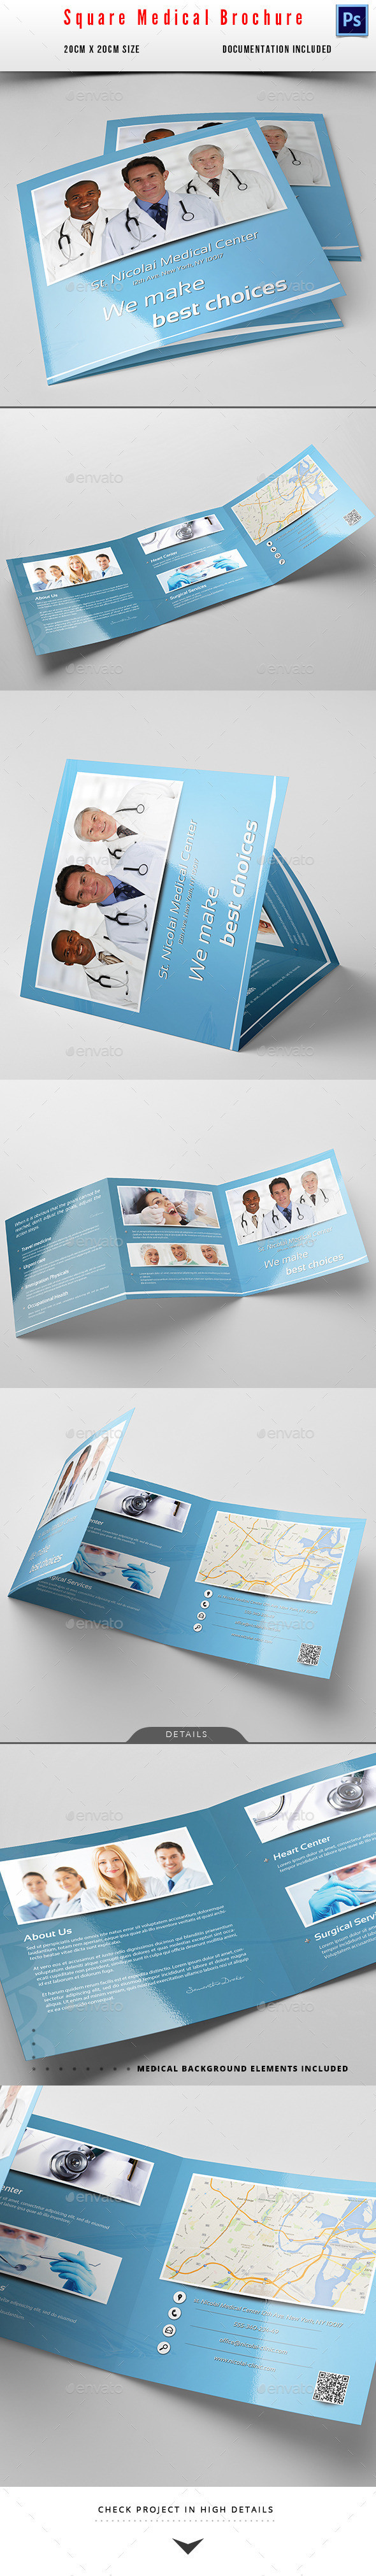 Medical brochure preview